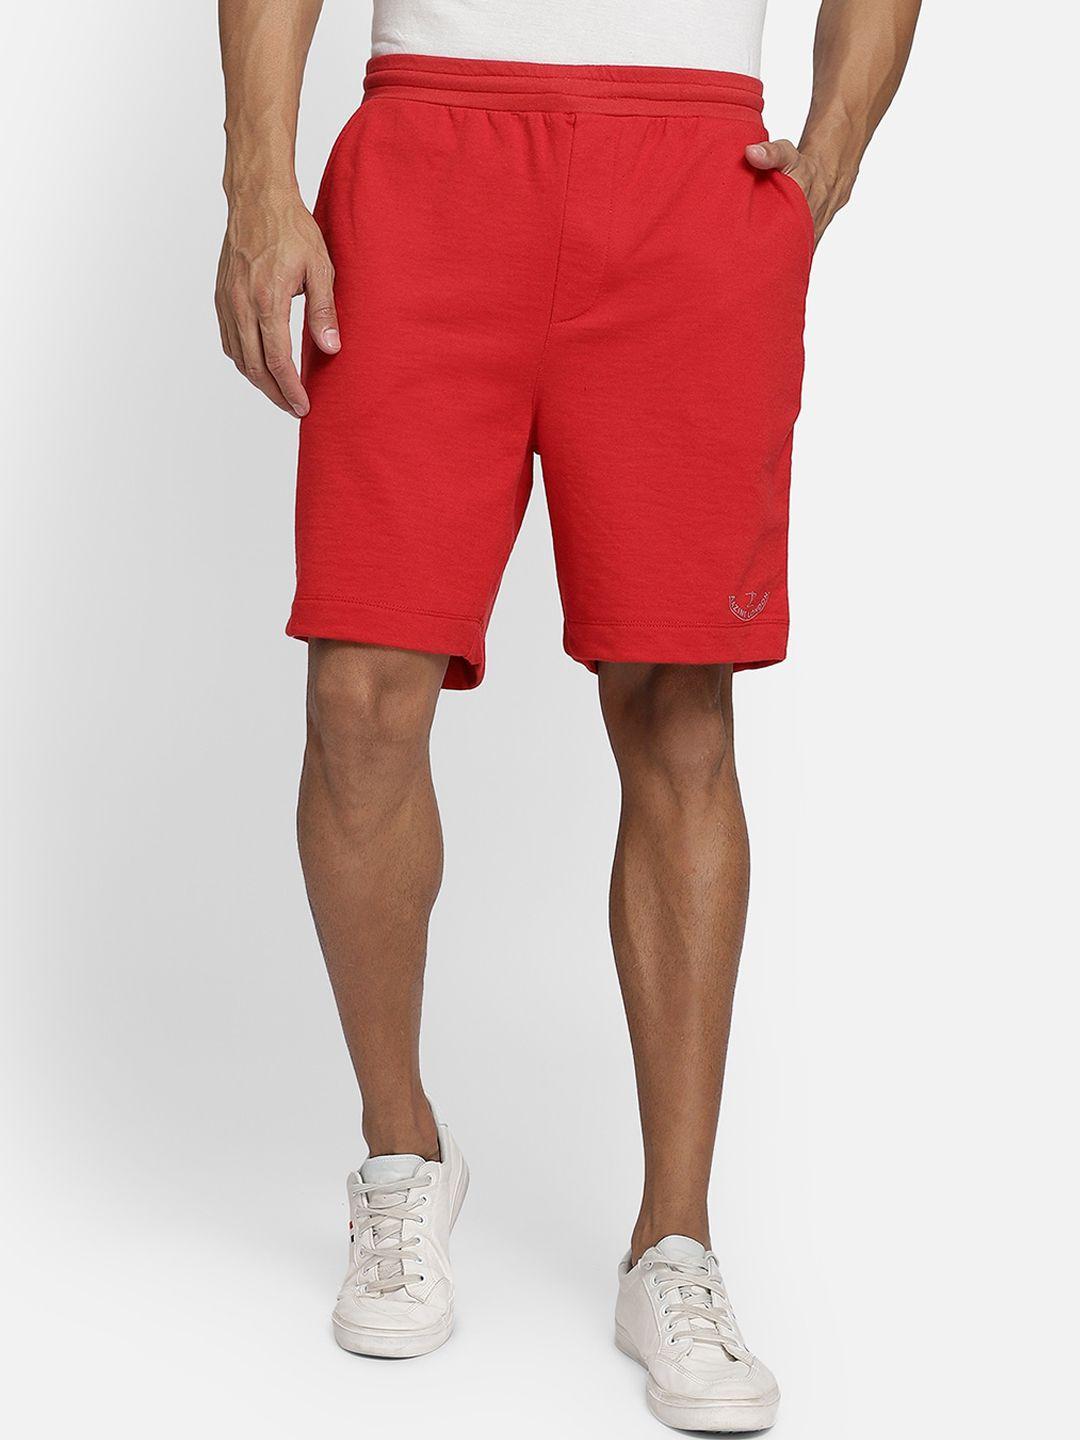 aazing london men red mid- rise sports shorts